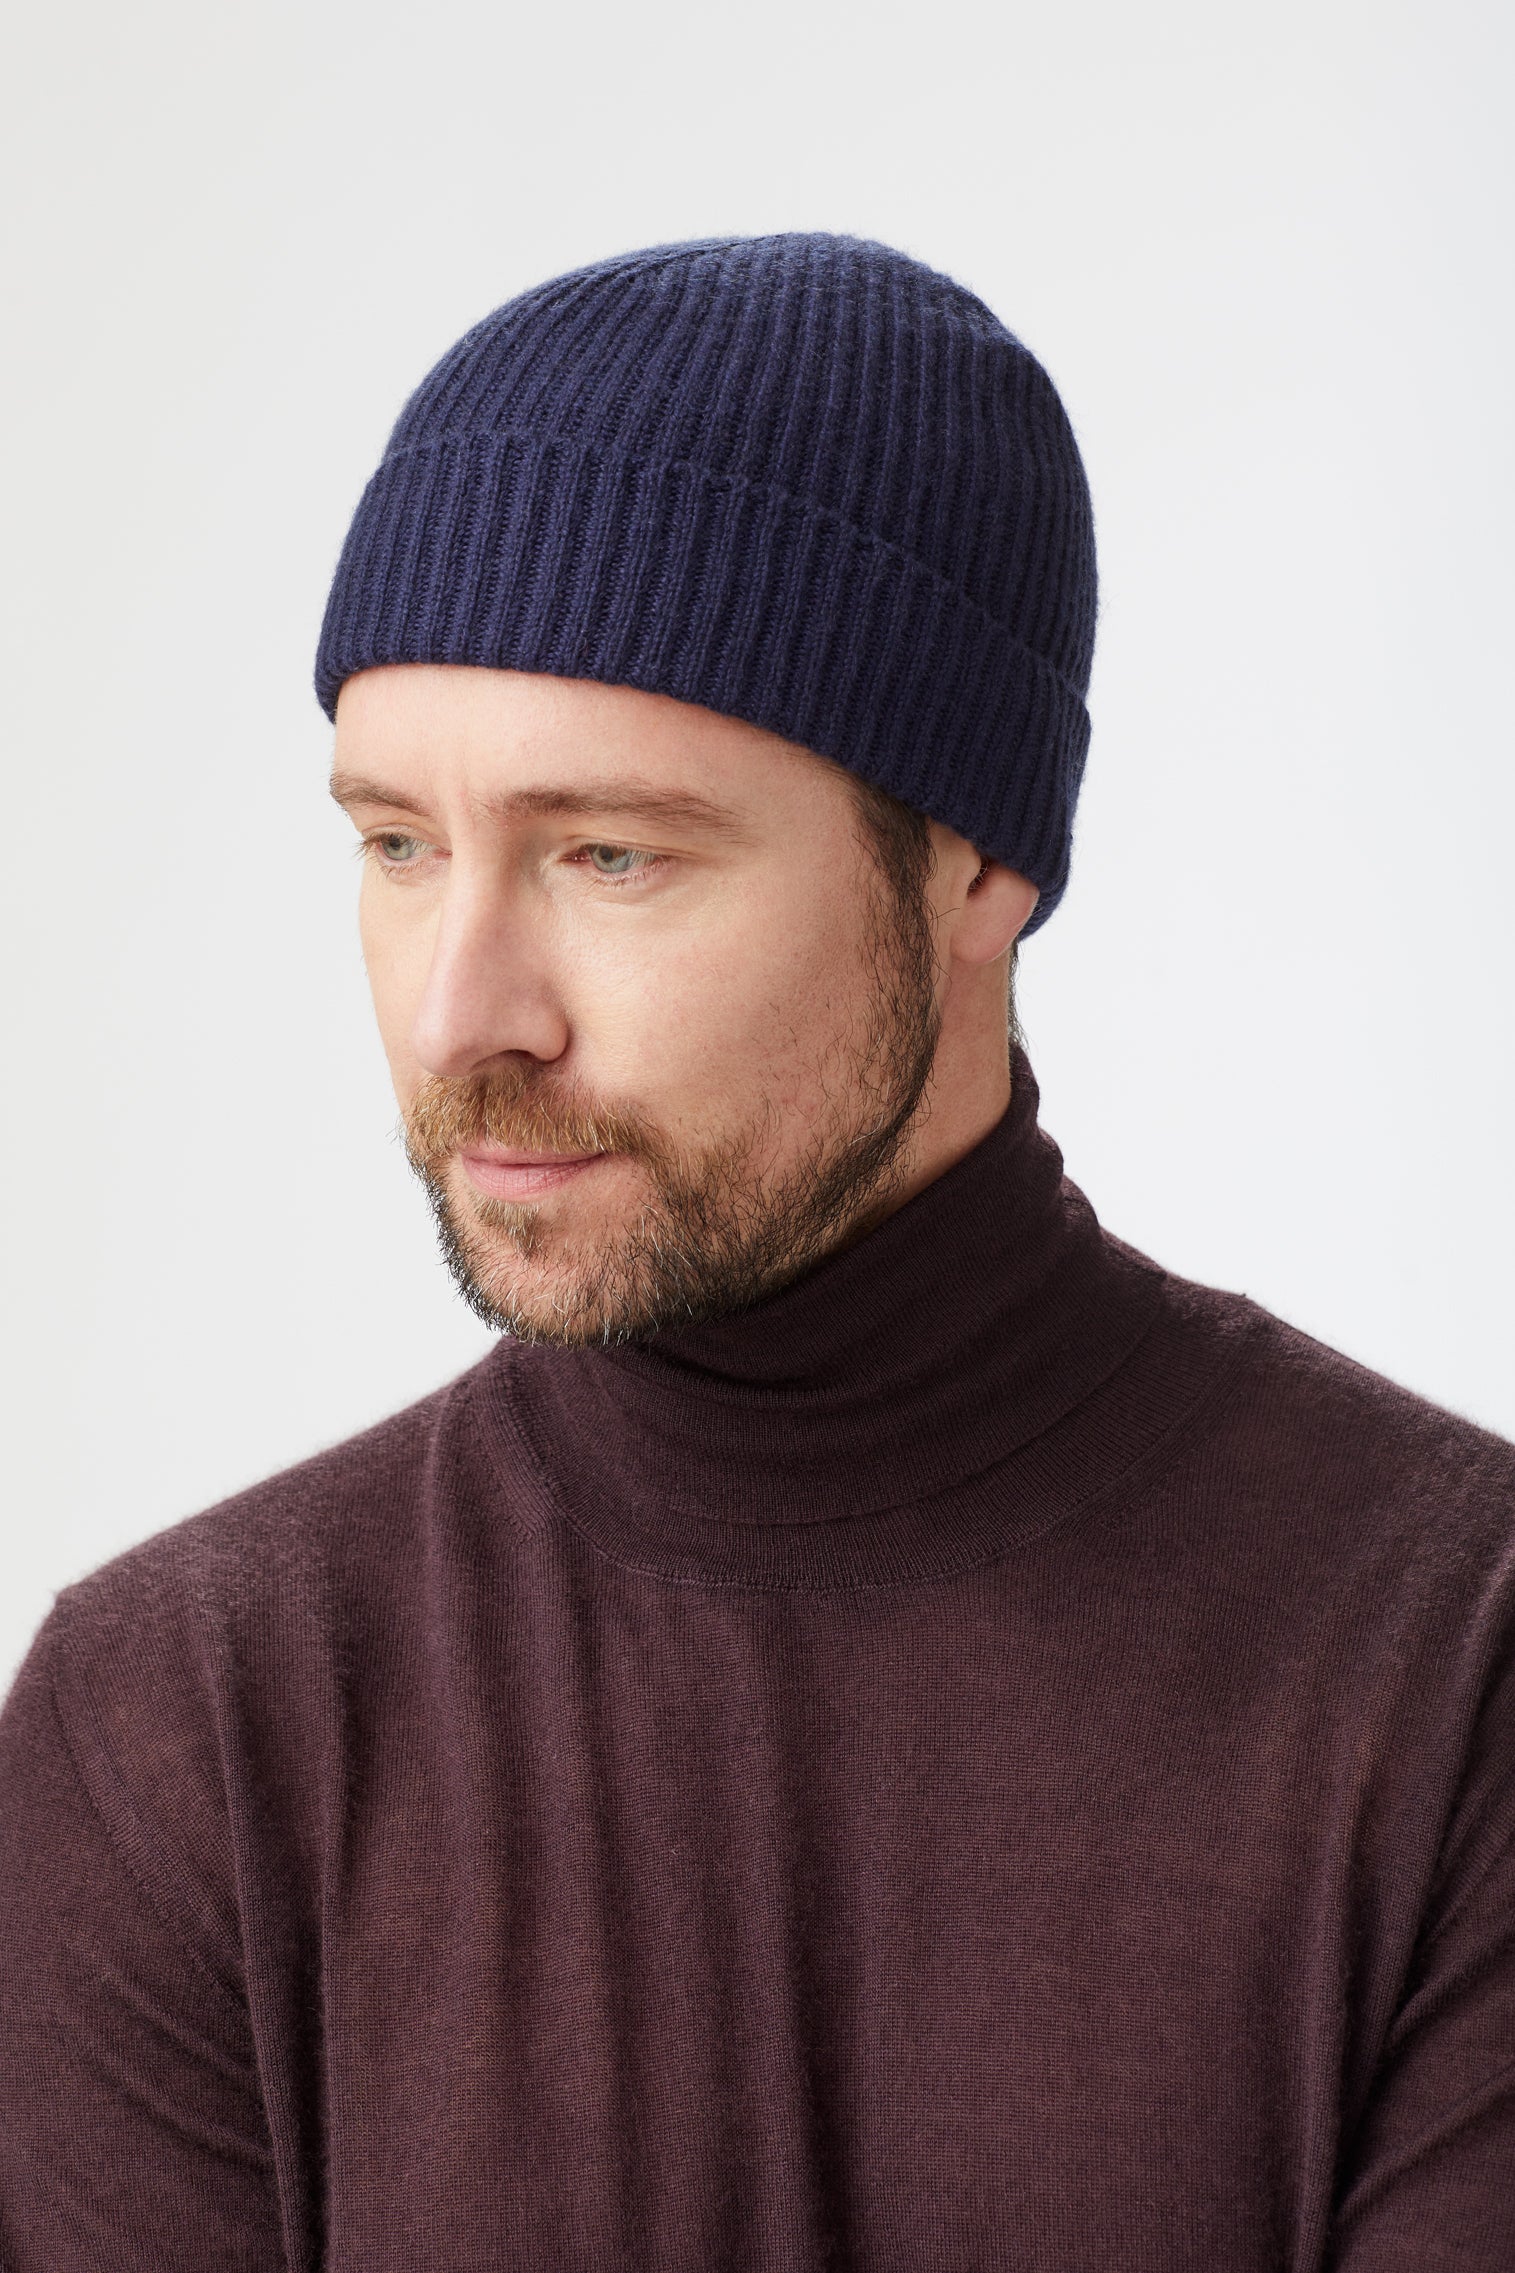 Blue Cashmere Ski Beanie - Products - Lock & Co. Hatters London UK